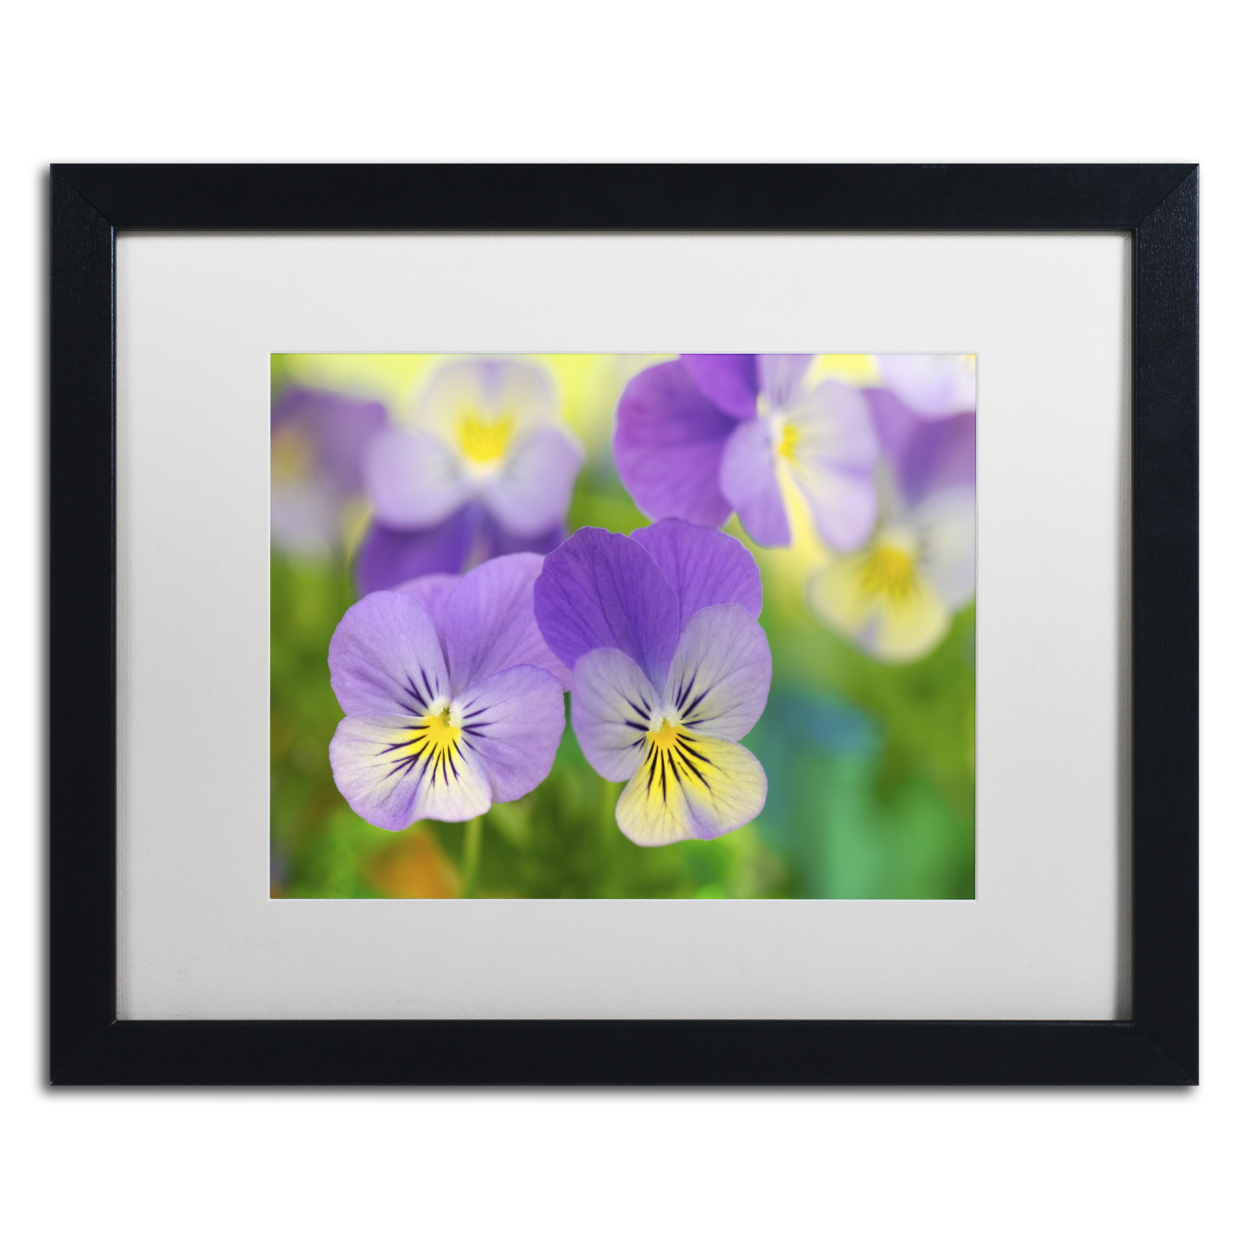 Cora Niele 'Violets' Black Wooden Framed Art 18 X 22 Inches